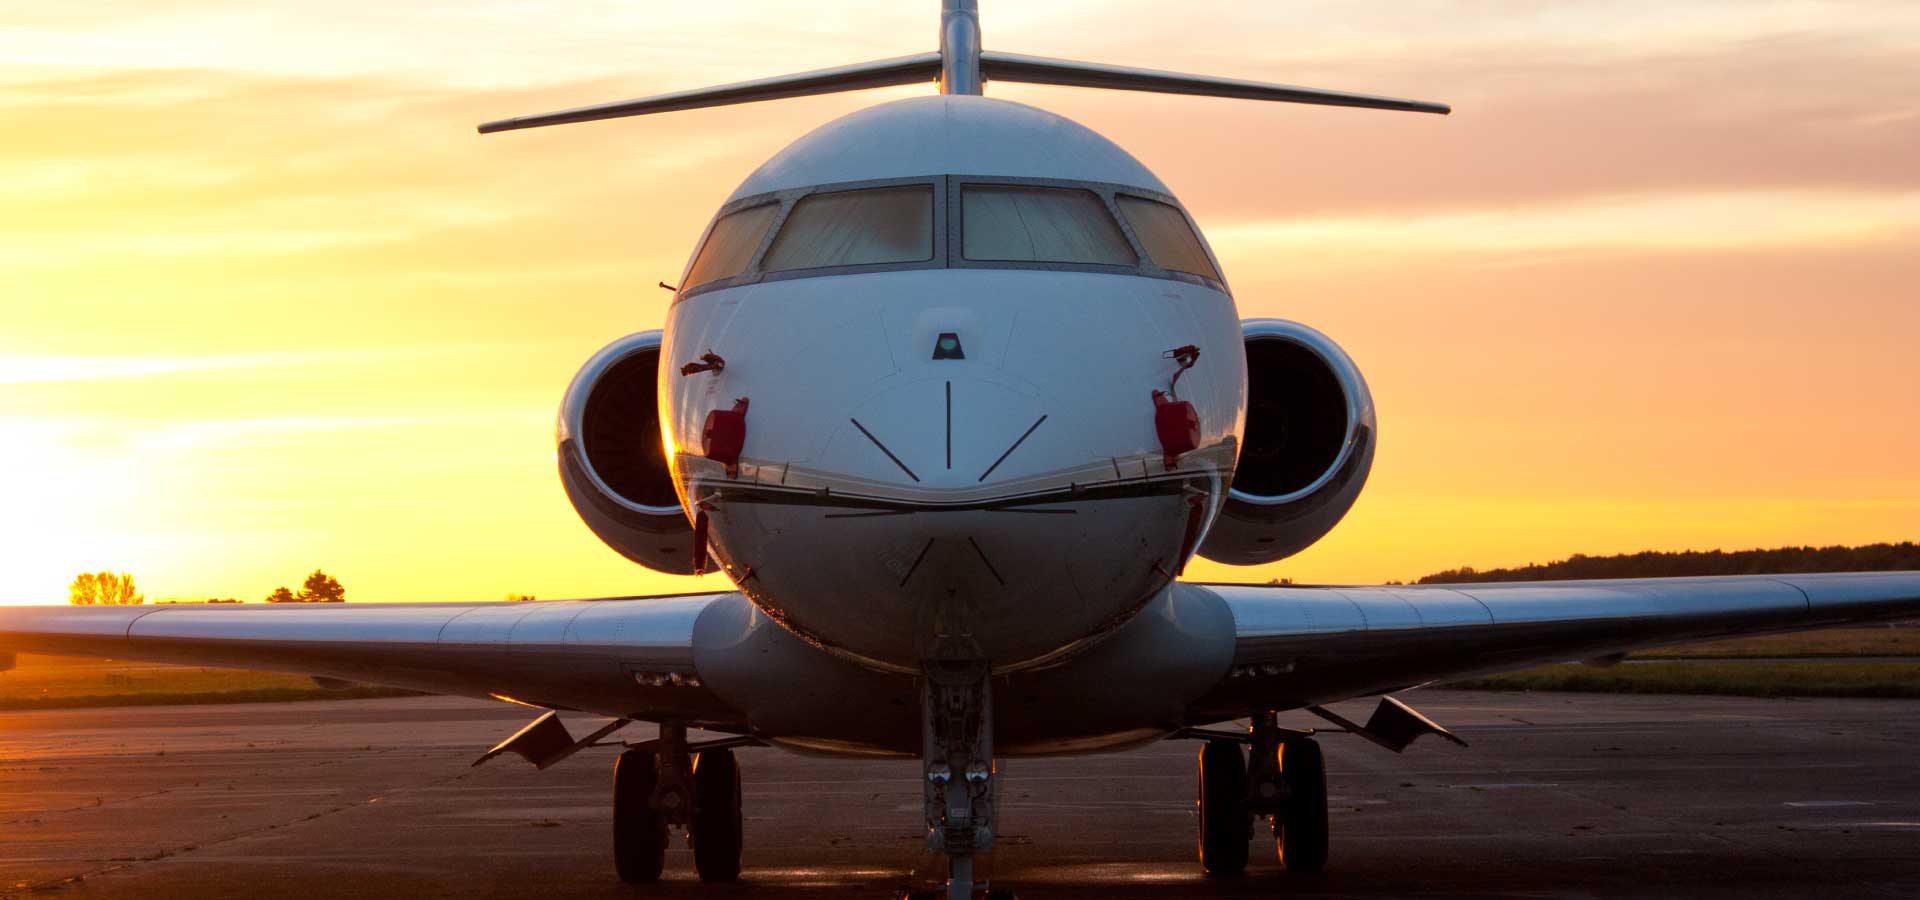 Private jet parked on ramp with evening sunset